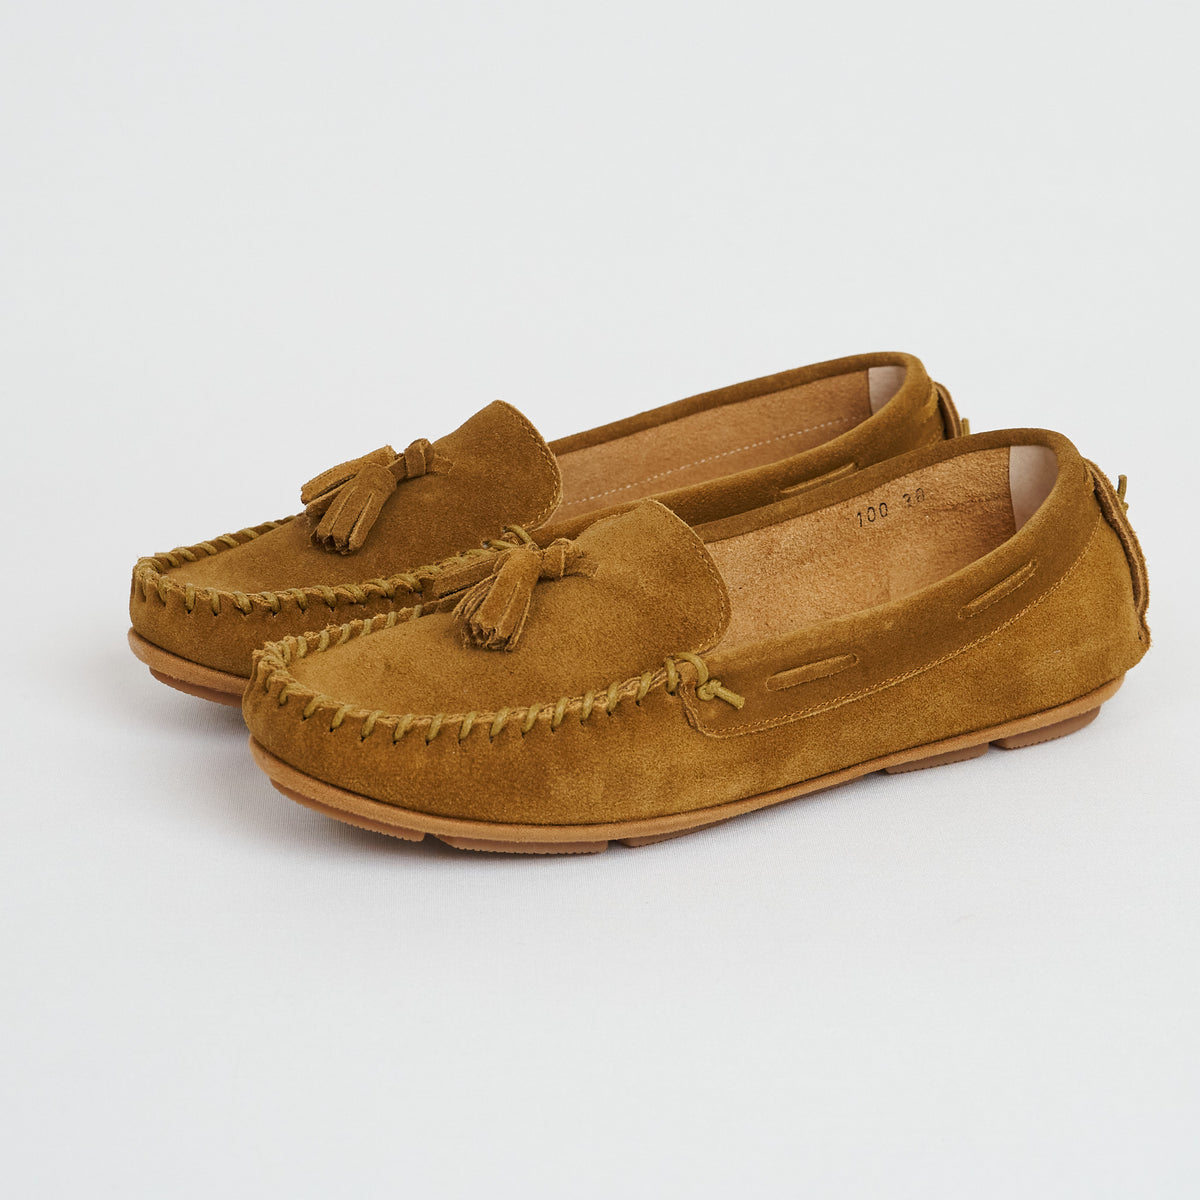 DeeCee style Ladies Hand Made Moccassins